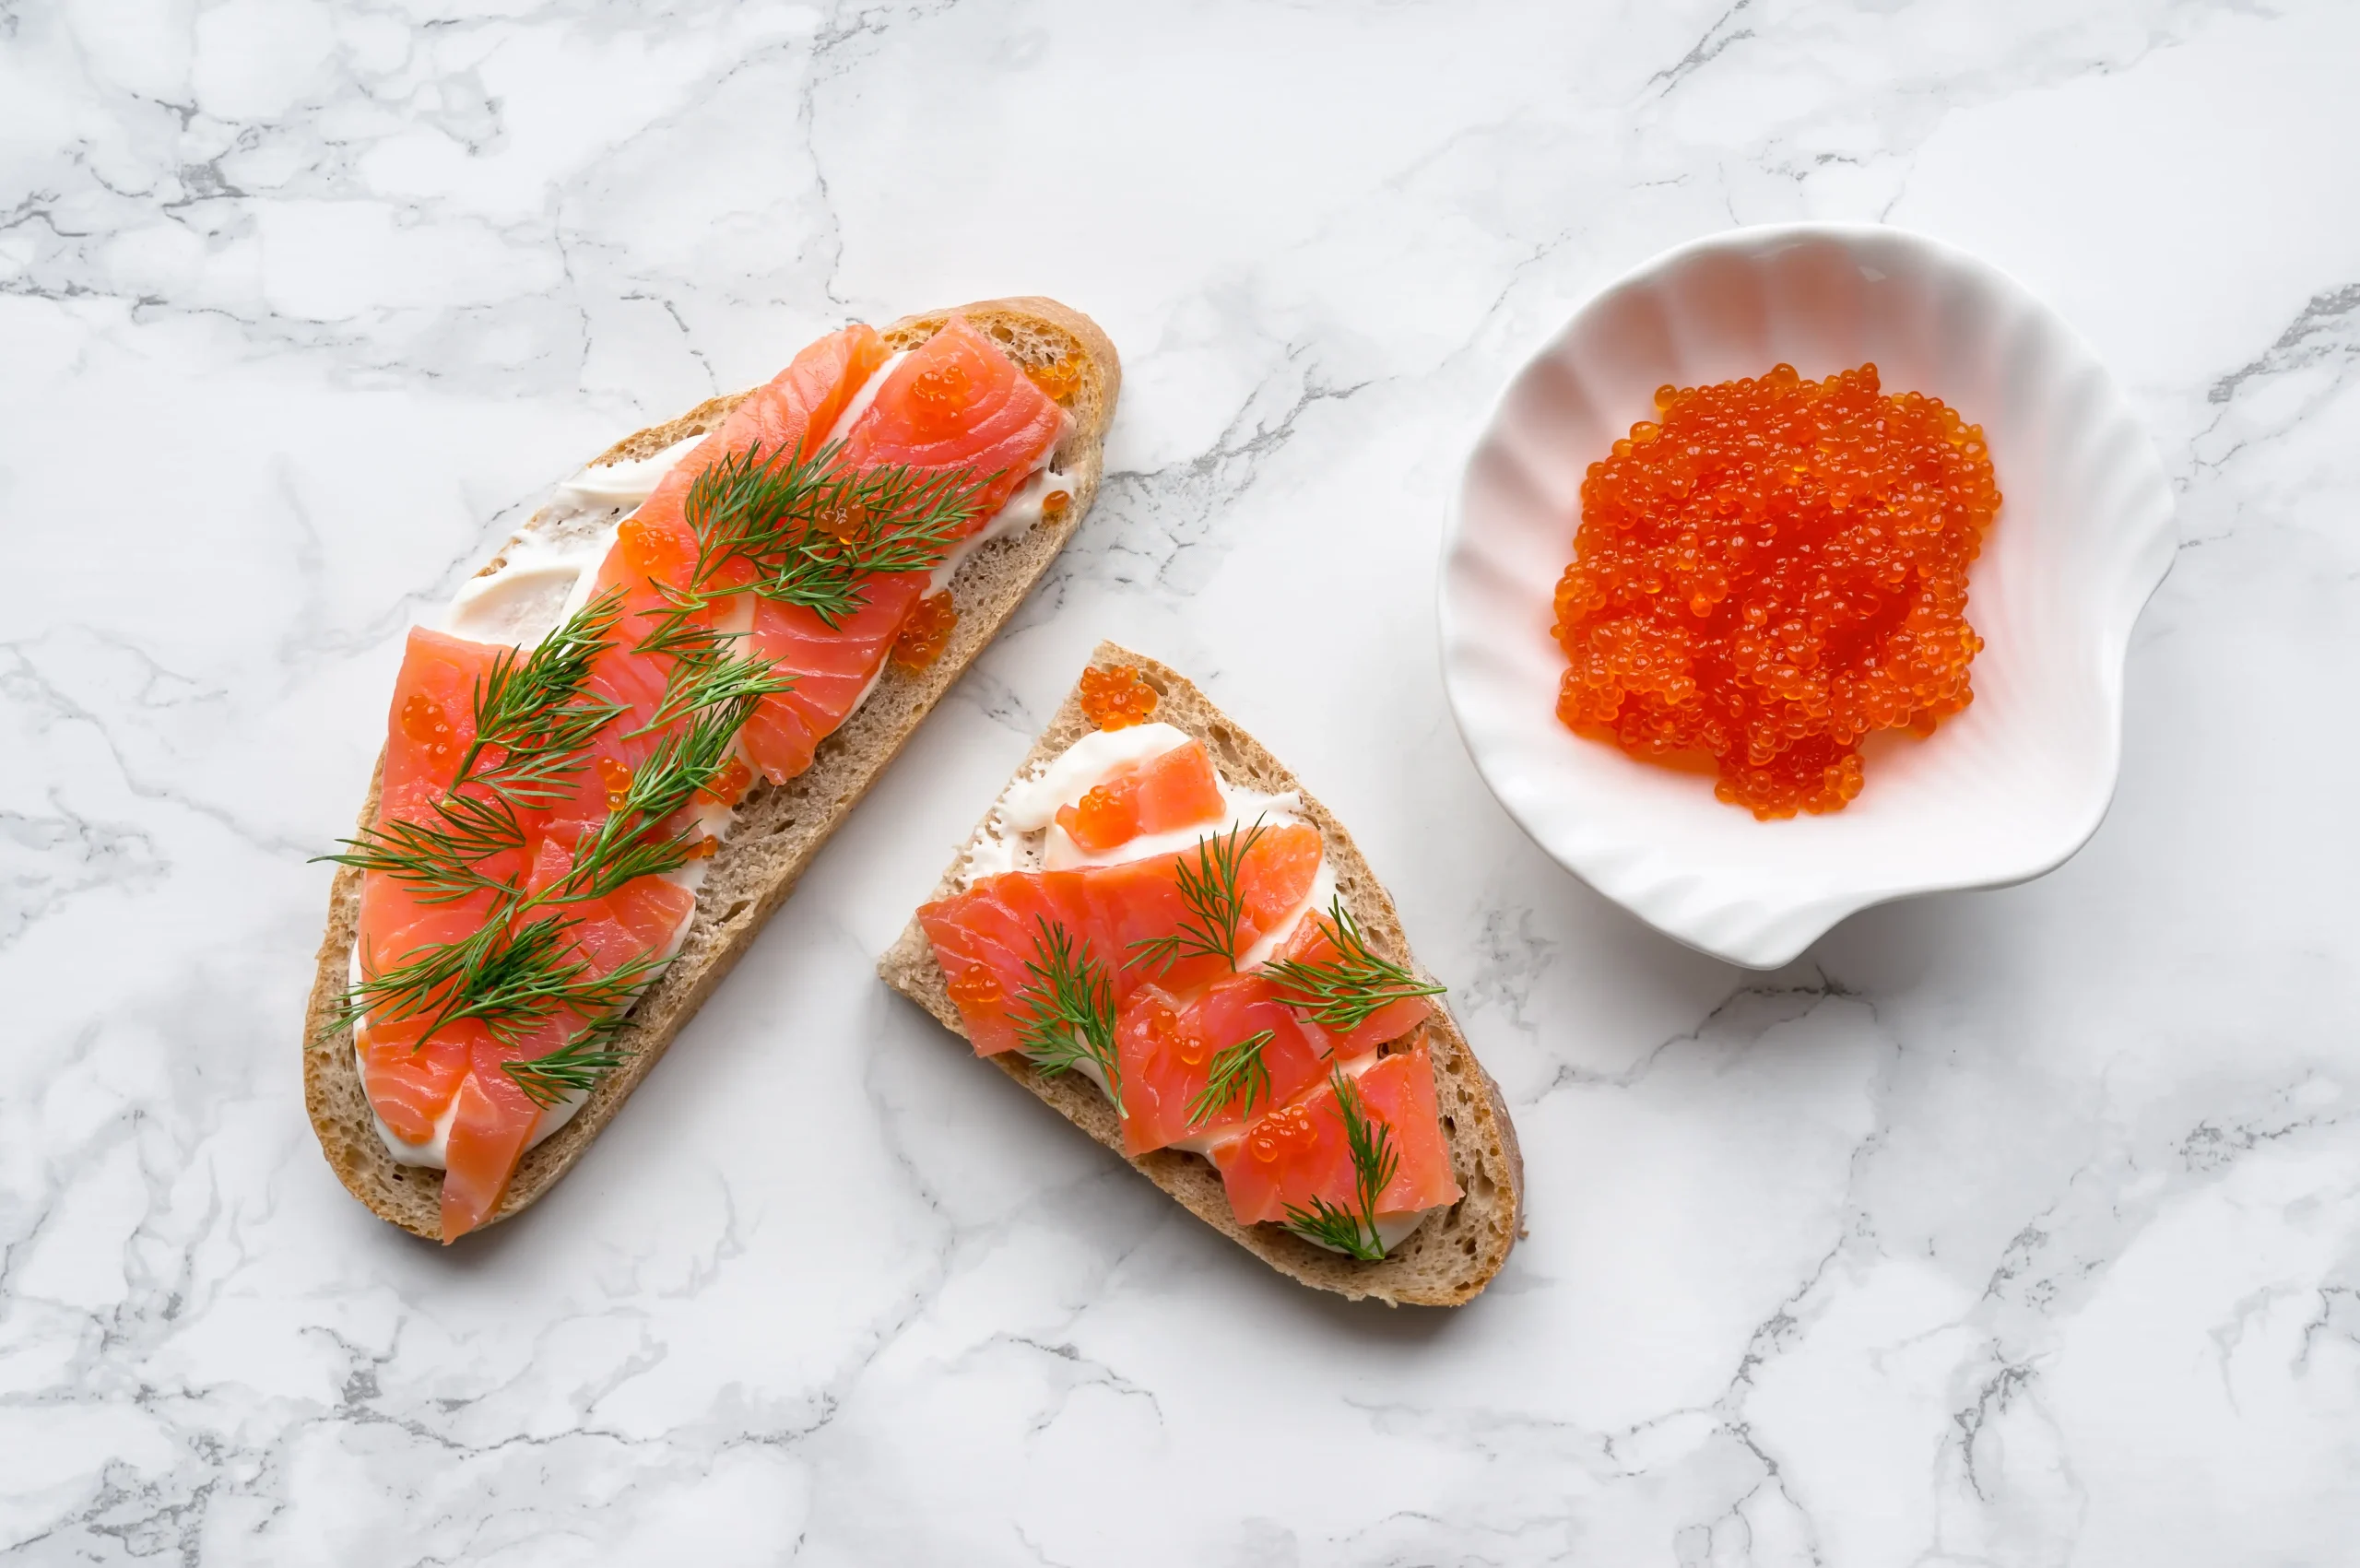 is smoked salmon healthy - Is smoked salmon bad for cholesterol